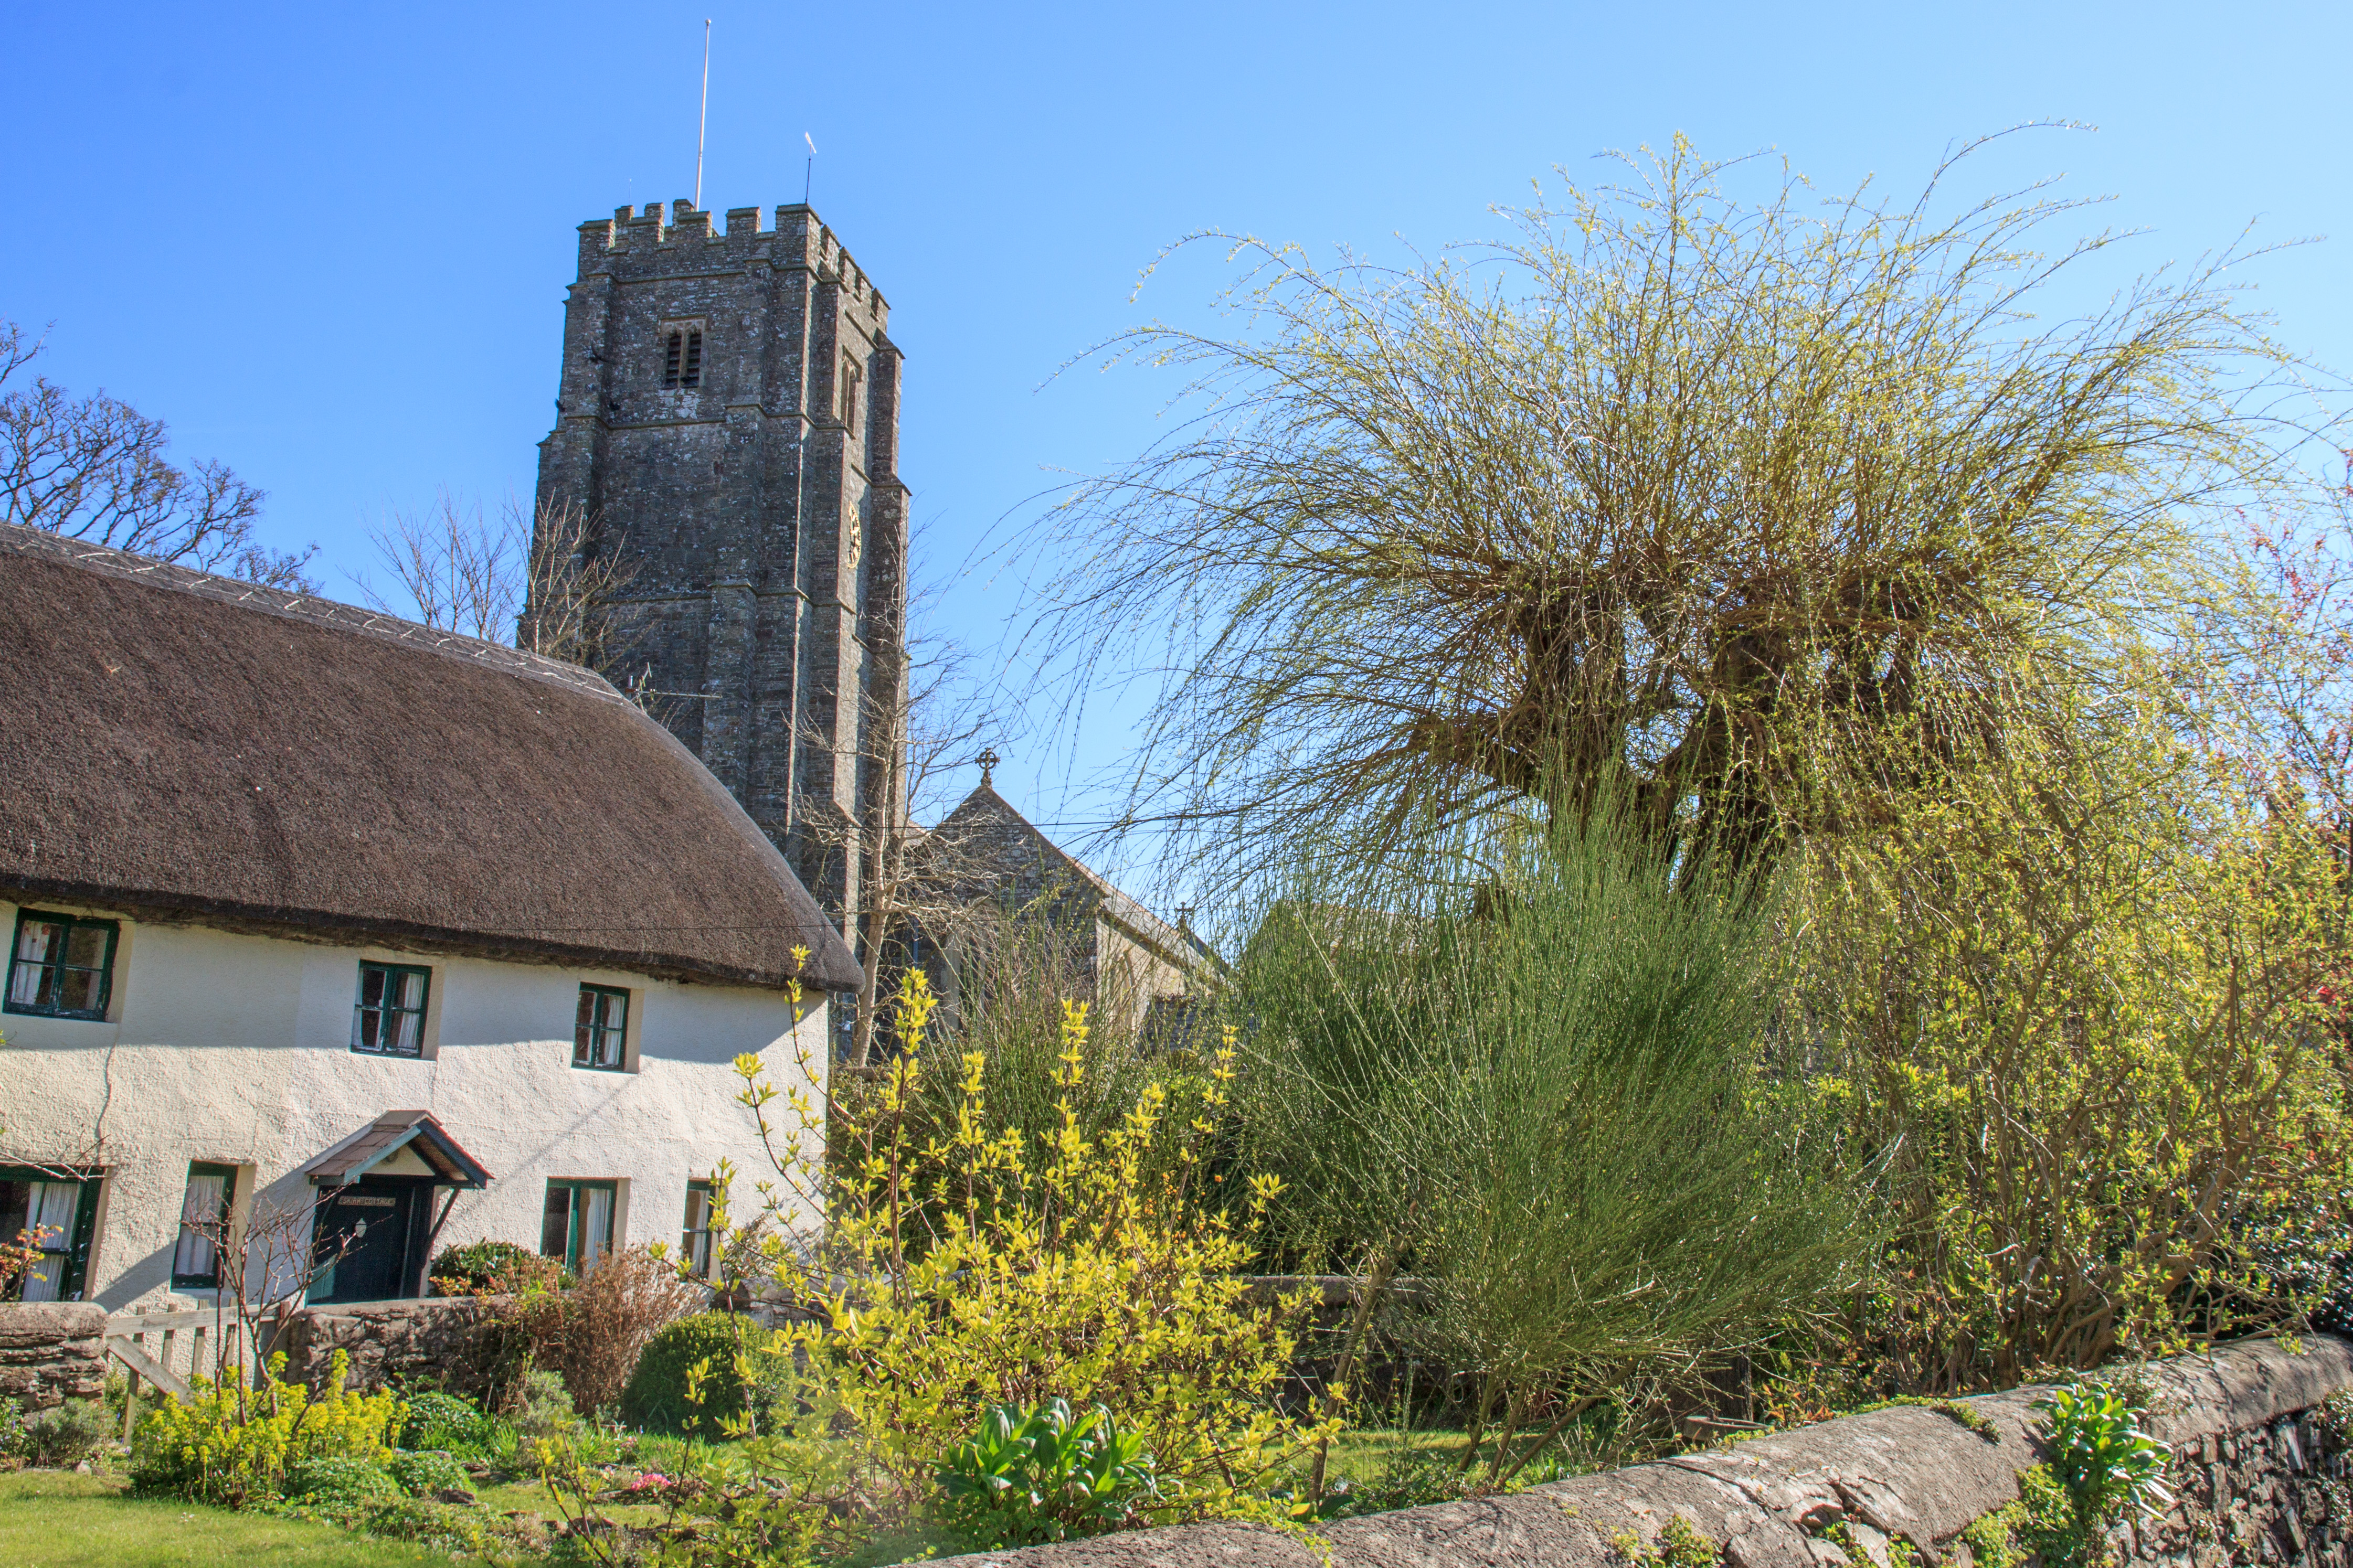 Henry Williamson's cottage and St George's Church in March